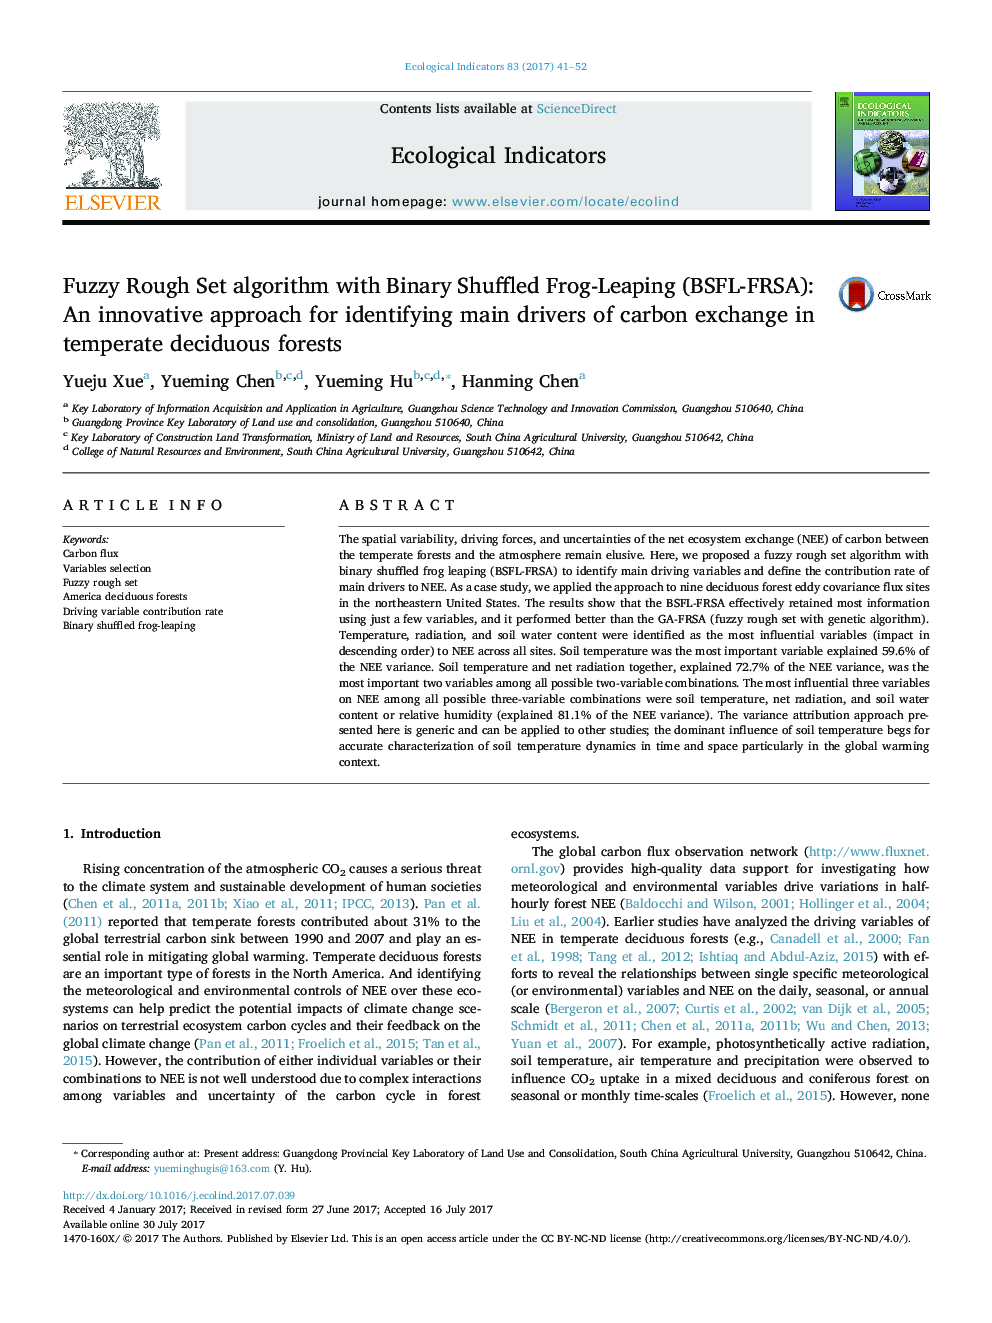 Fuzzy Rough Set algorithm with Binary Shuffled Frog-Leaping (BSFL-FRSA): An innovative approach for identifying main drivers of carbon exchange in temperate deciduous forests